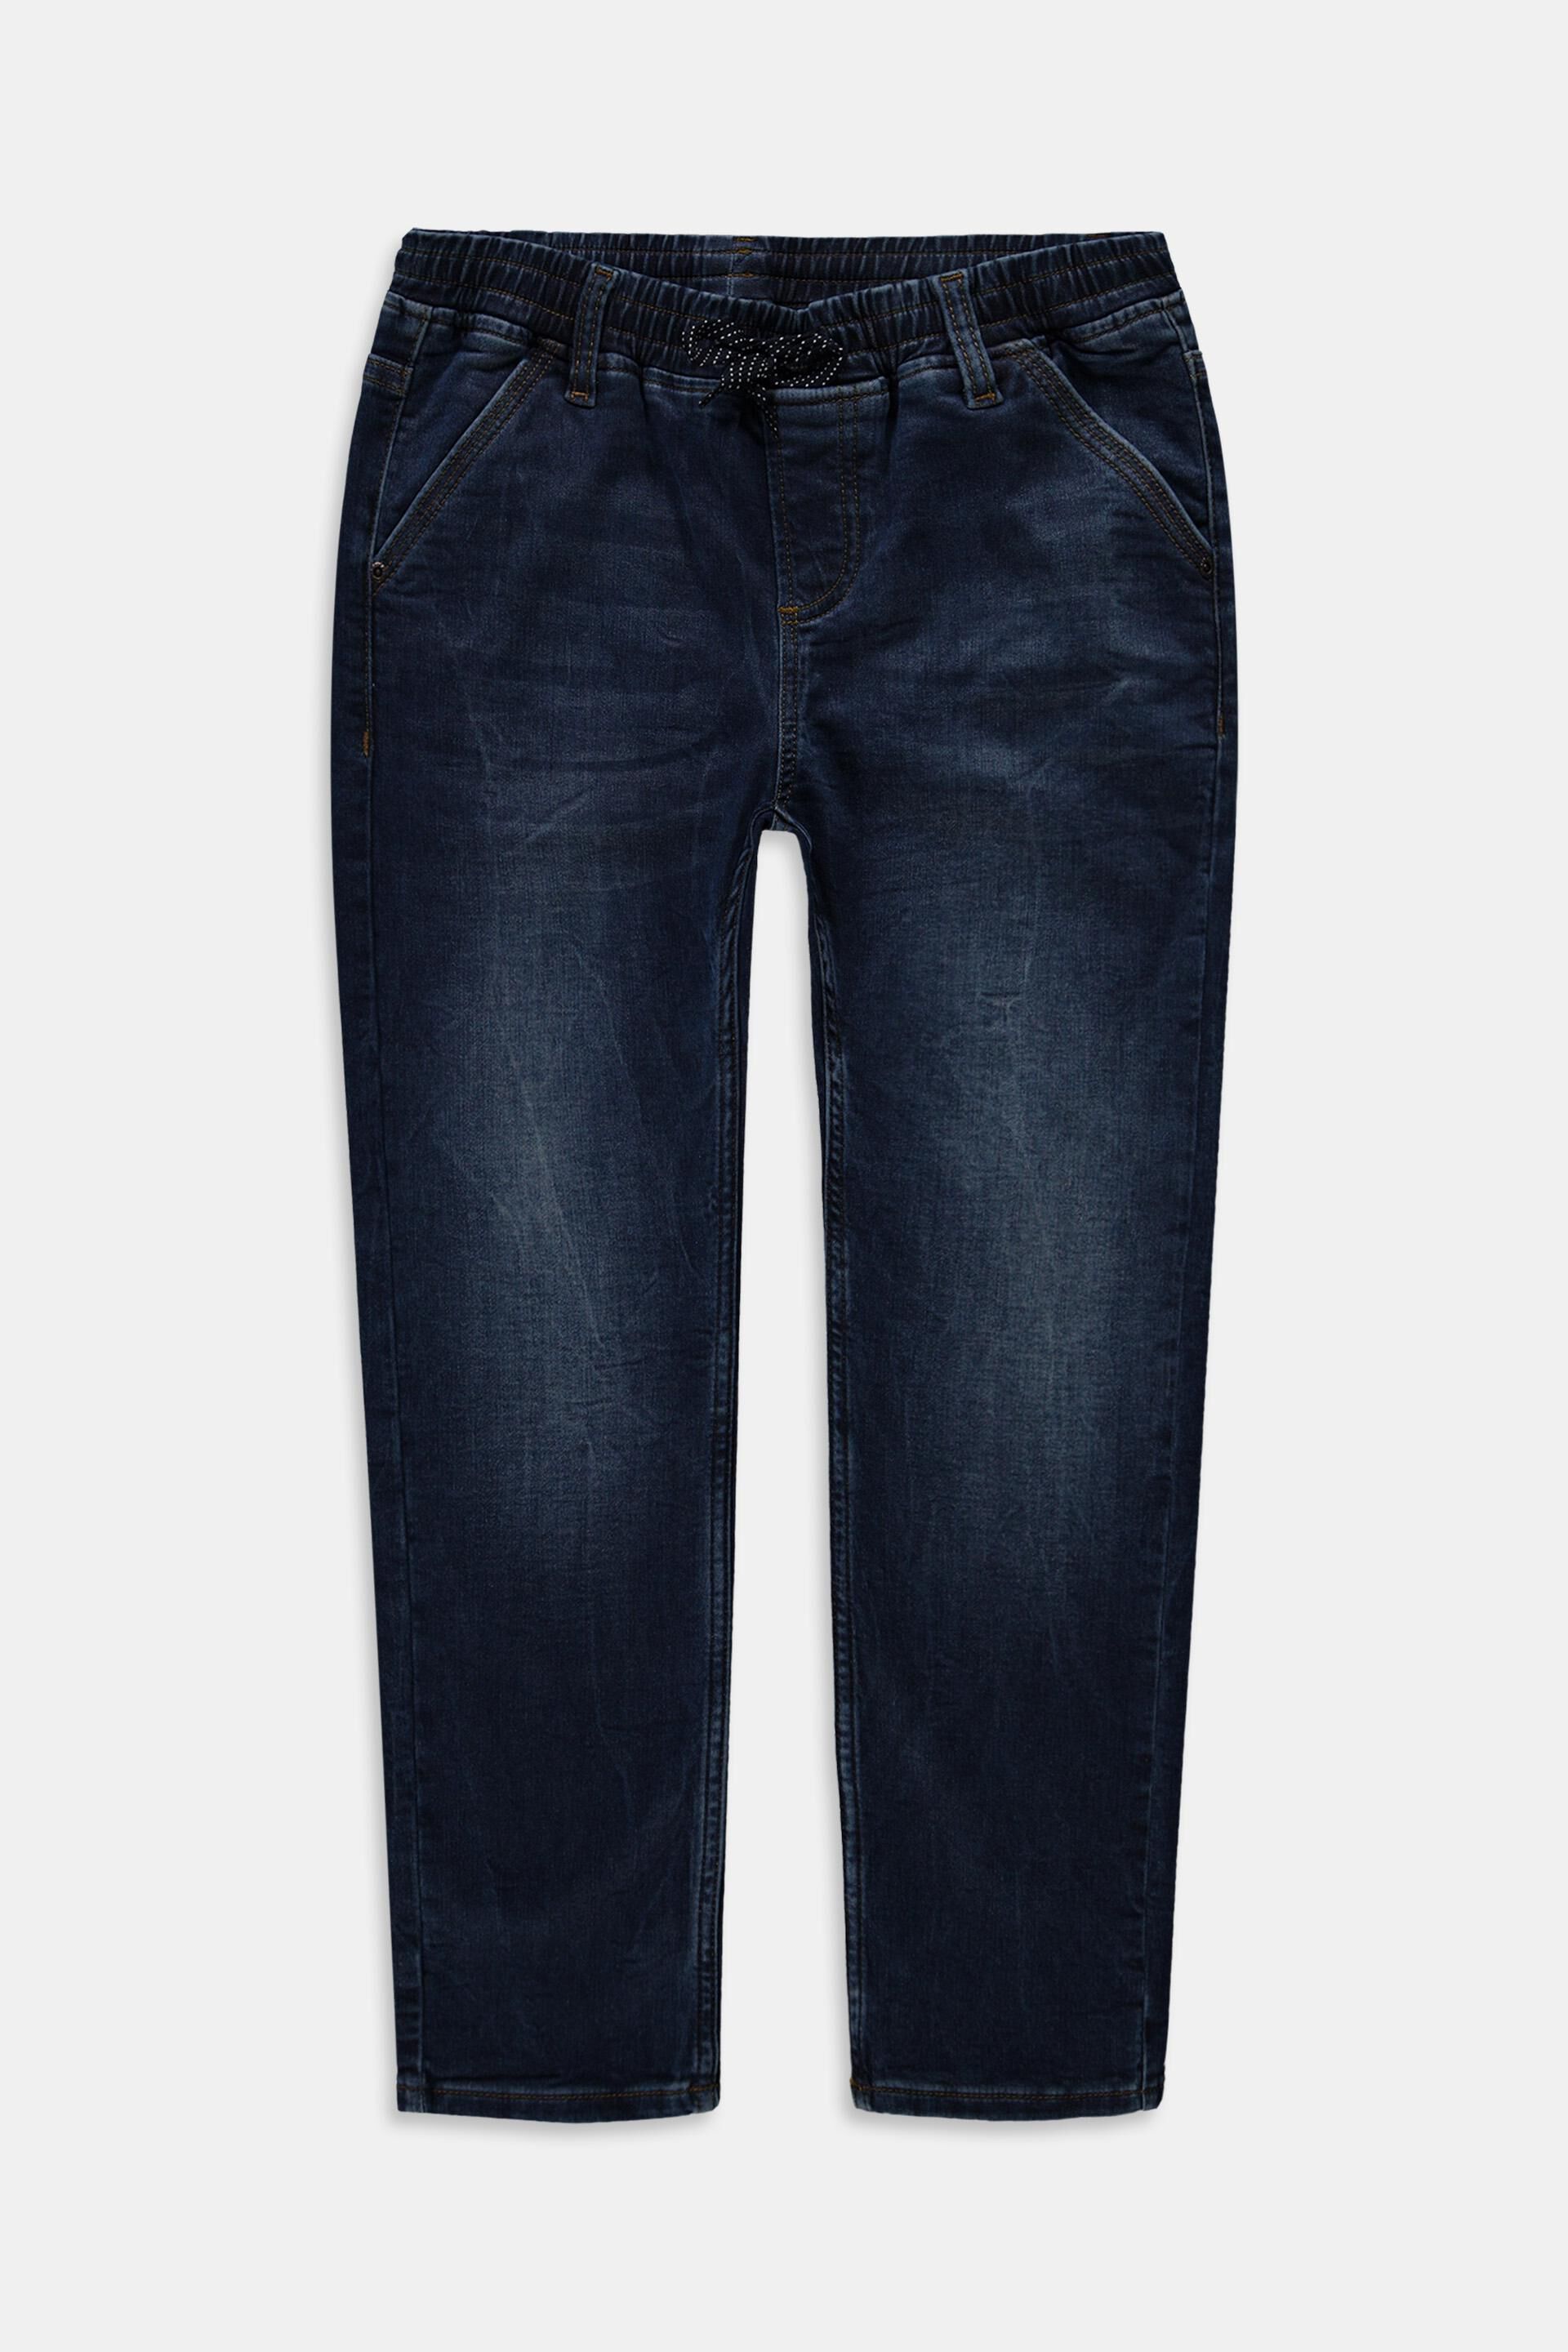 Esprit waistband Jeans elasticated with